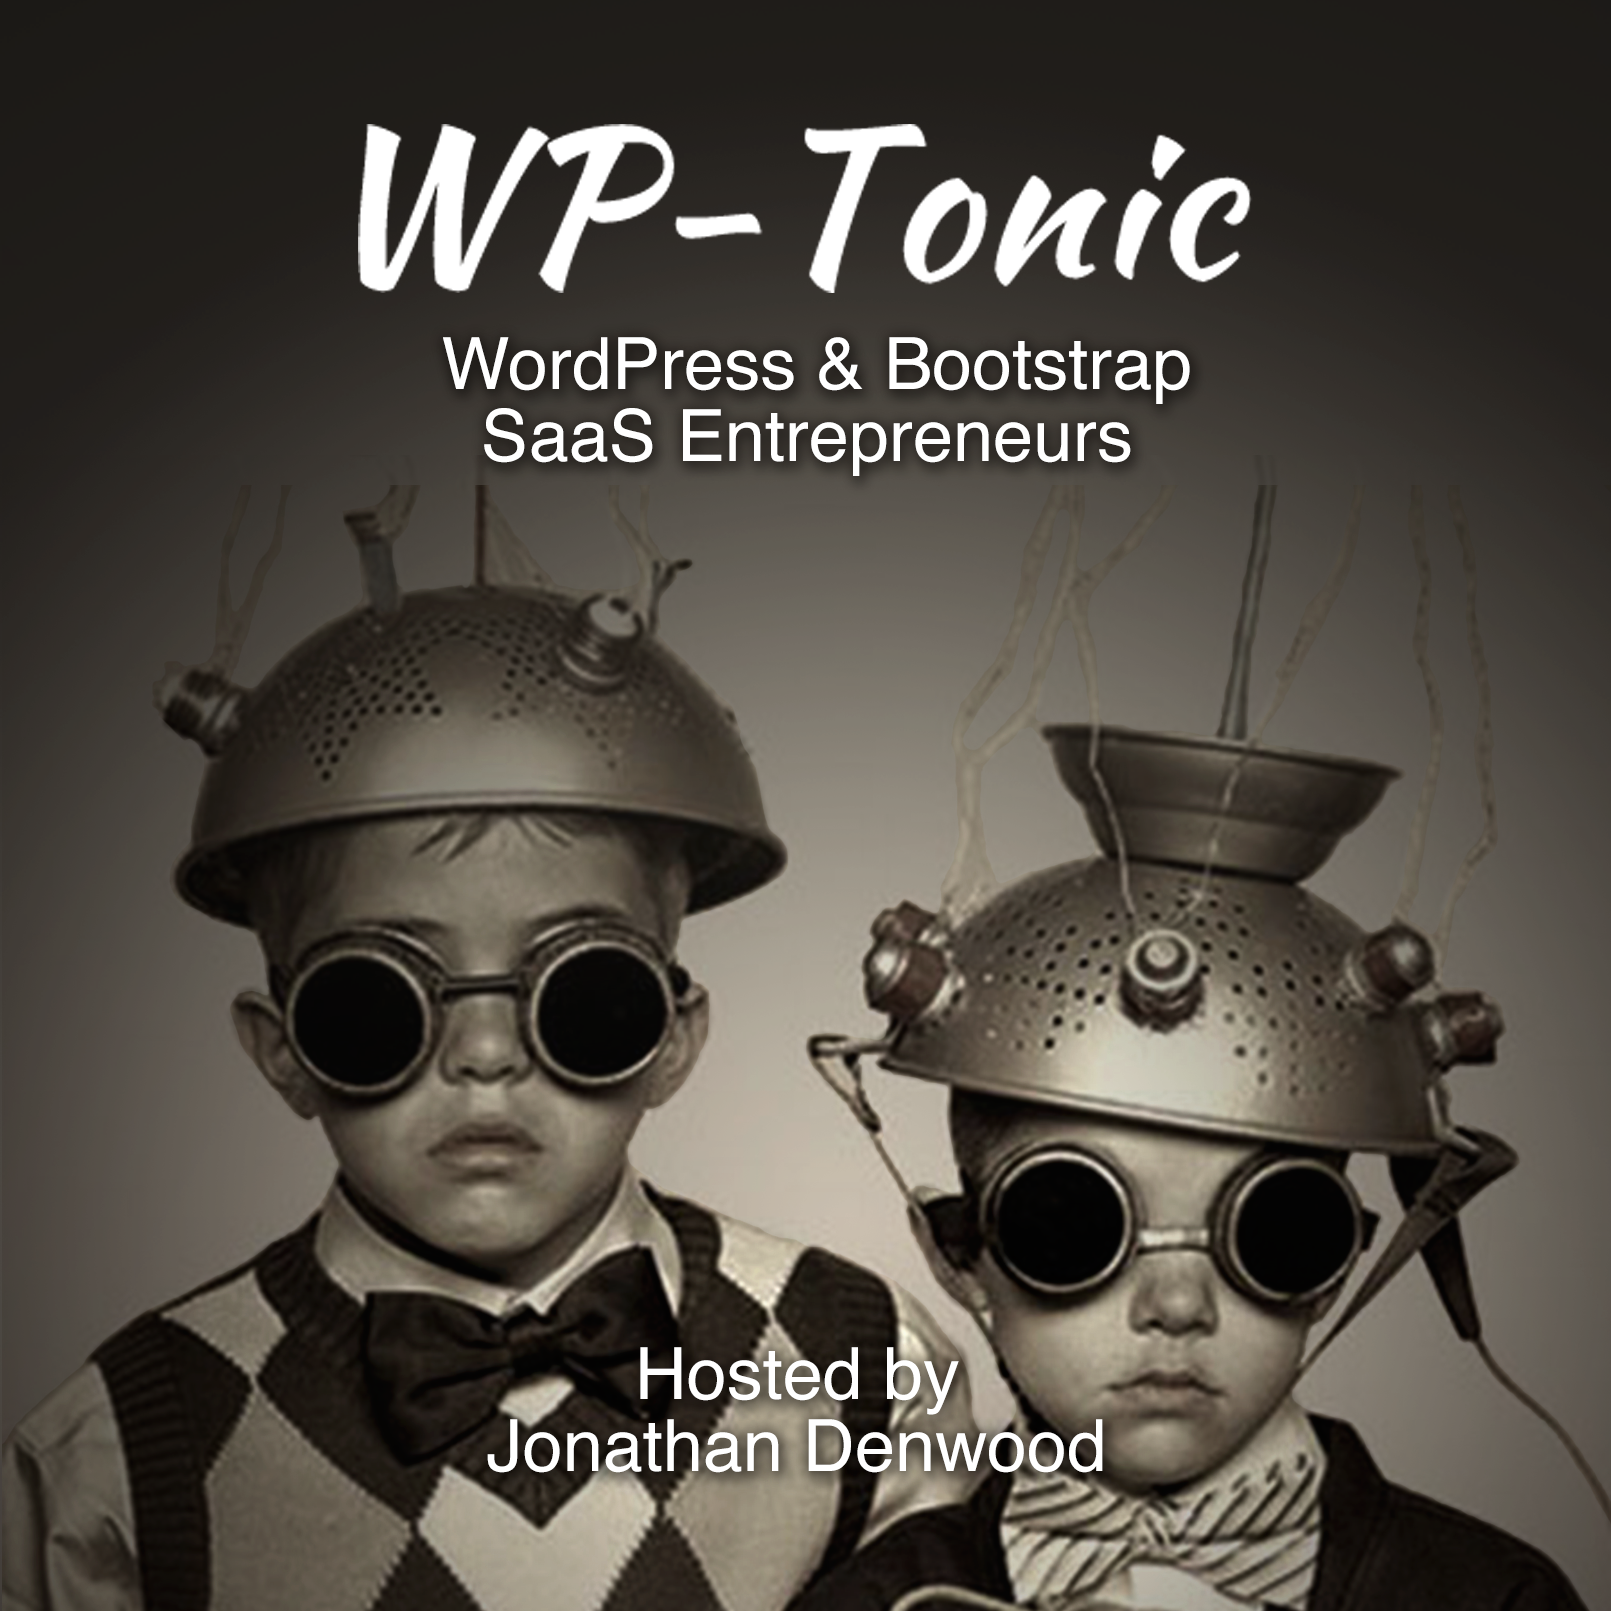 #501 WP-Tonic Round-Table Show on Friday, June, 5th, 2020 at 8:30 am PST